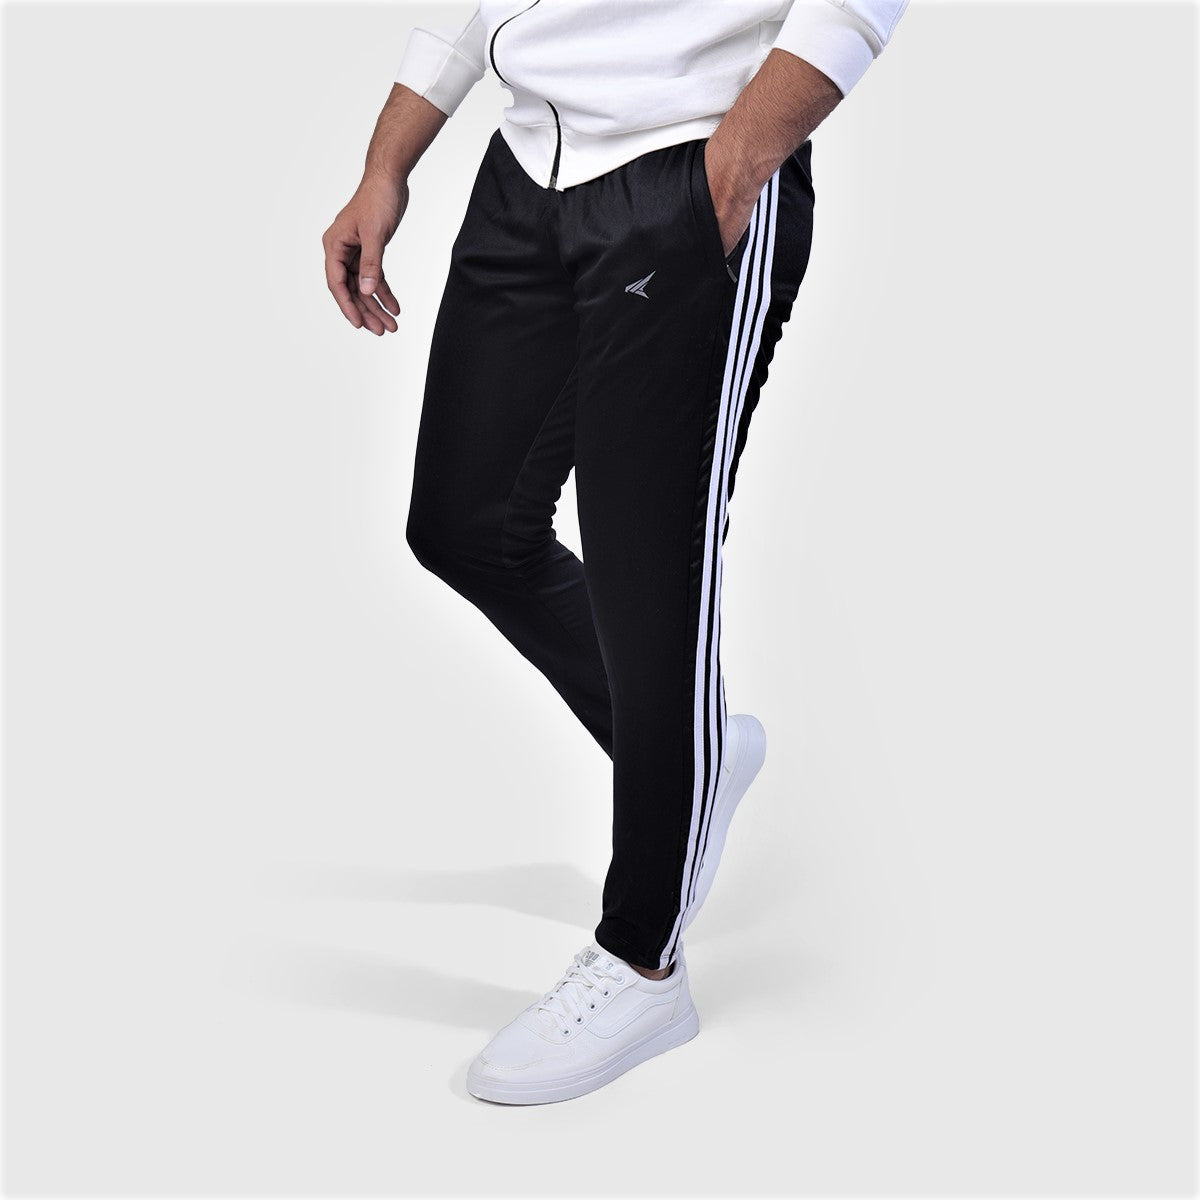 Black Trouser With Three Stripes